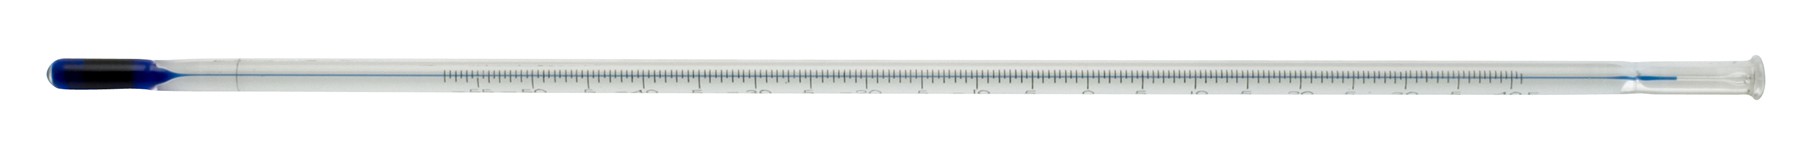 H-B DURAC Plus ASTM Like Liquid-In-Glass Thermometer; 16F / High Softening Point, Total Immersion, 85 to 392F, Organic Liquid Fill